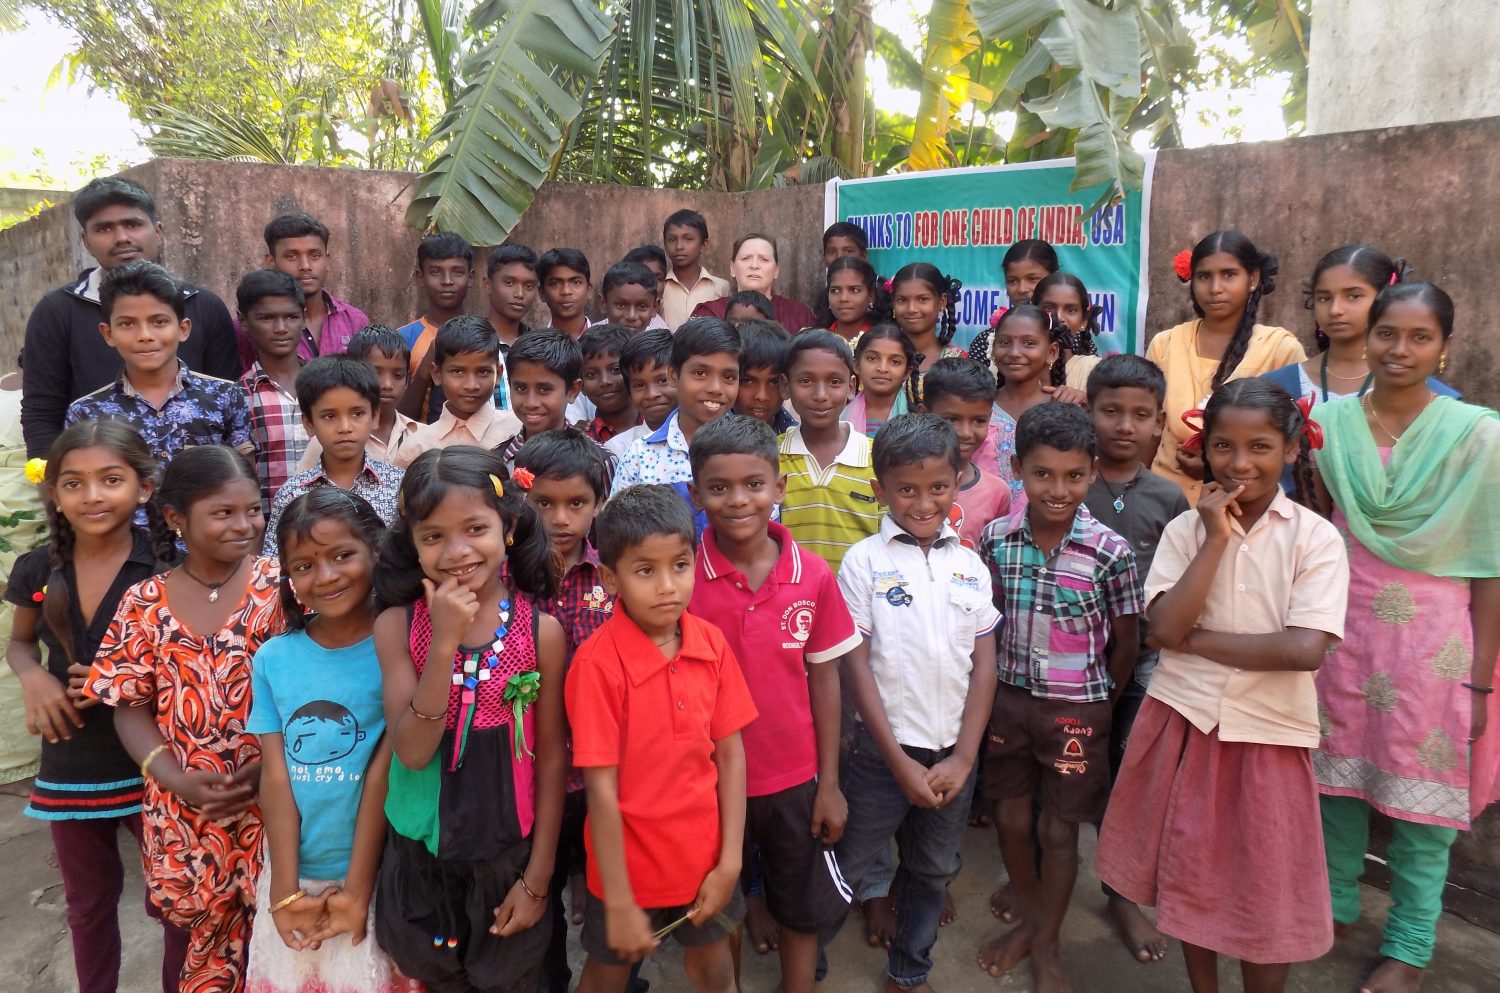 RaeAnn Thomas Gust (back row, center) surrounded by children from Eleanganny, India.